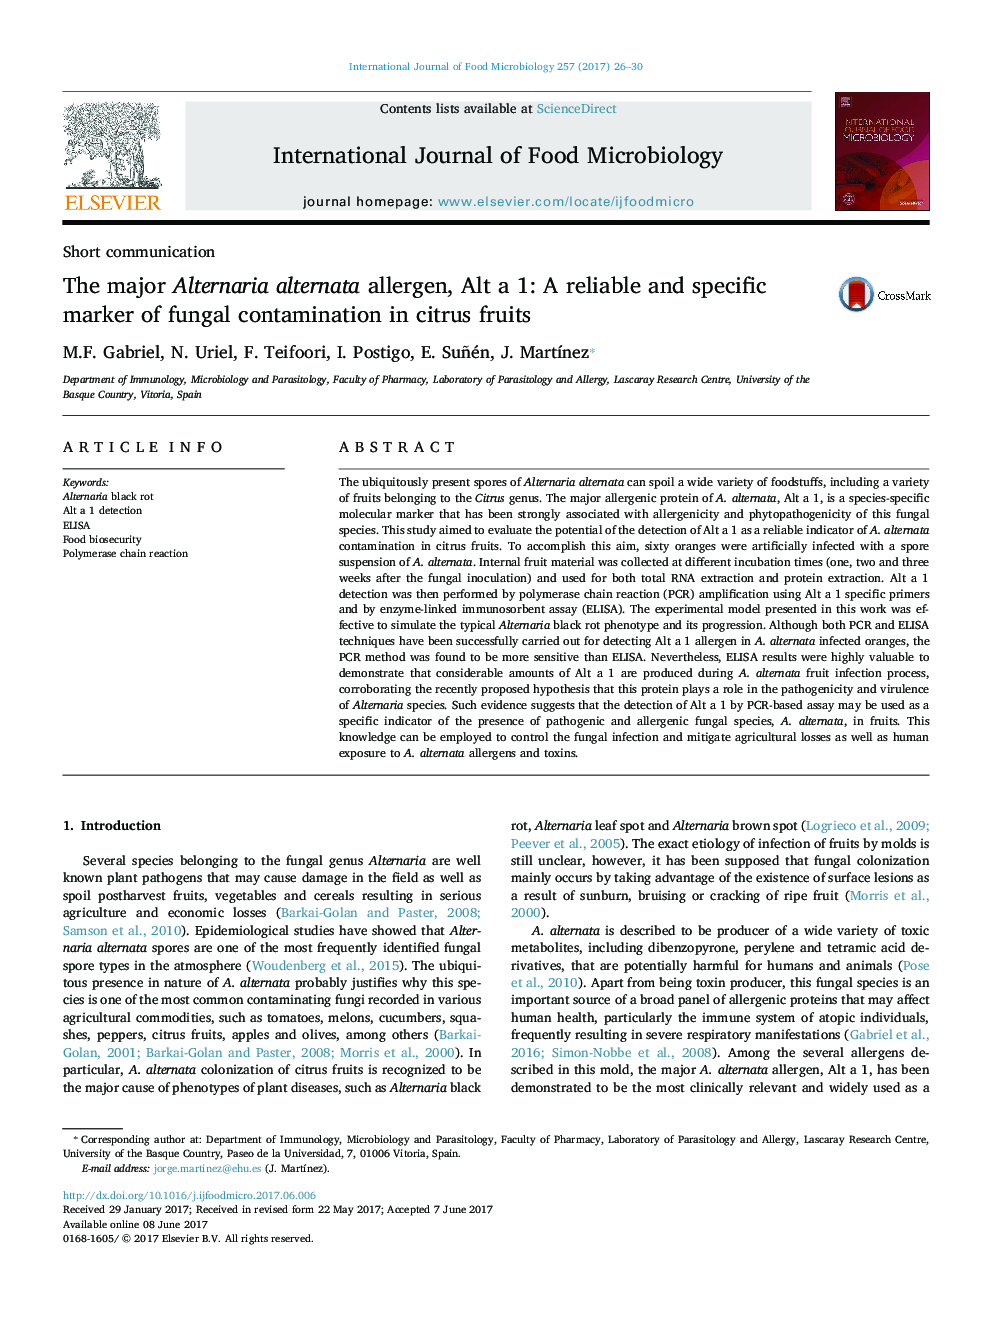 Short communicationThe major Alternaria alternata allergen, Alt a 1: A reliable and specific marker of fungal contamination in citrus fruits